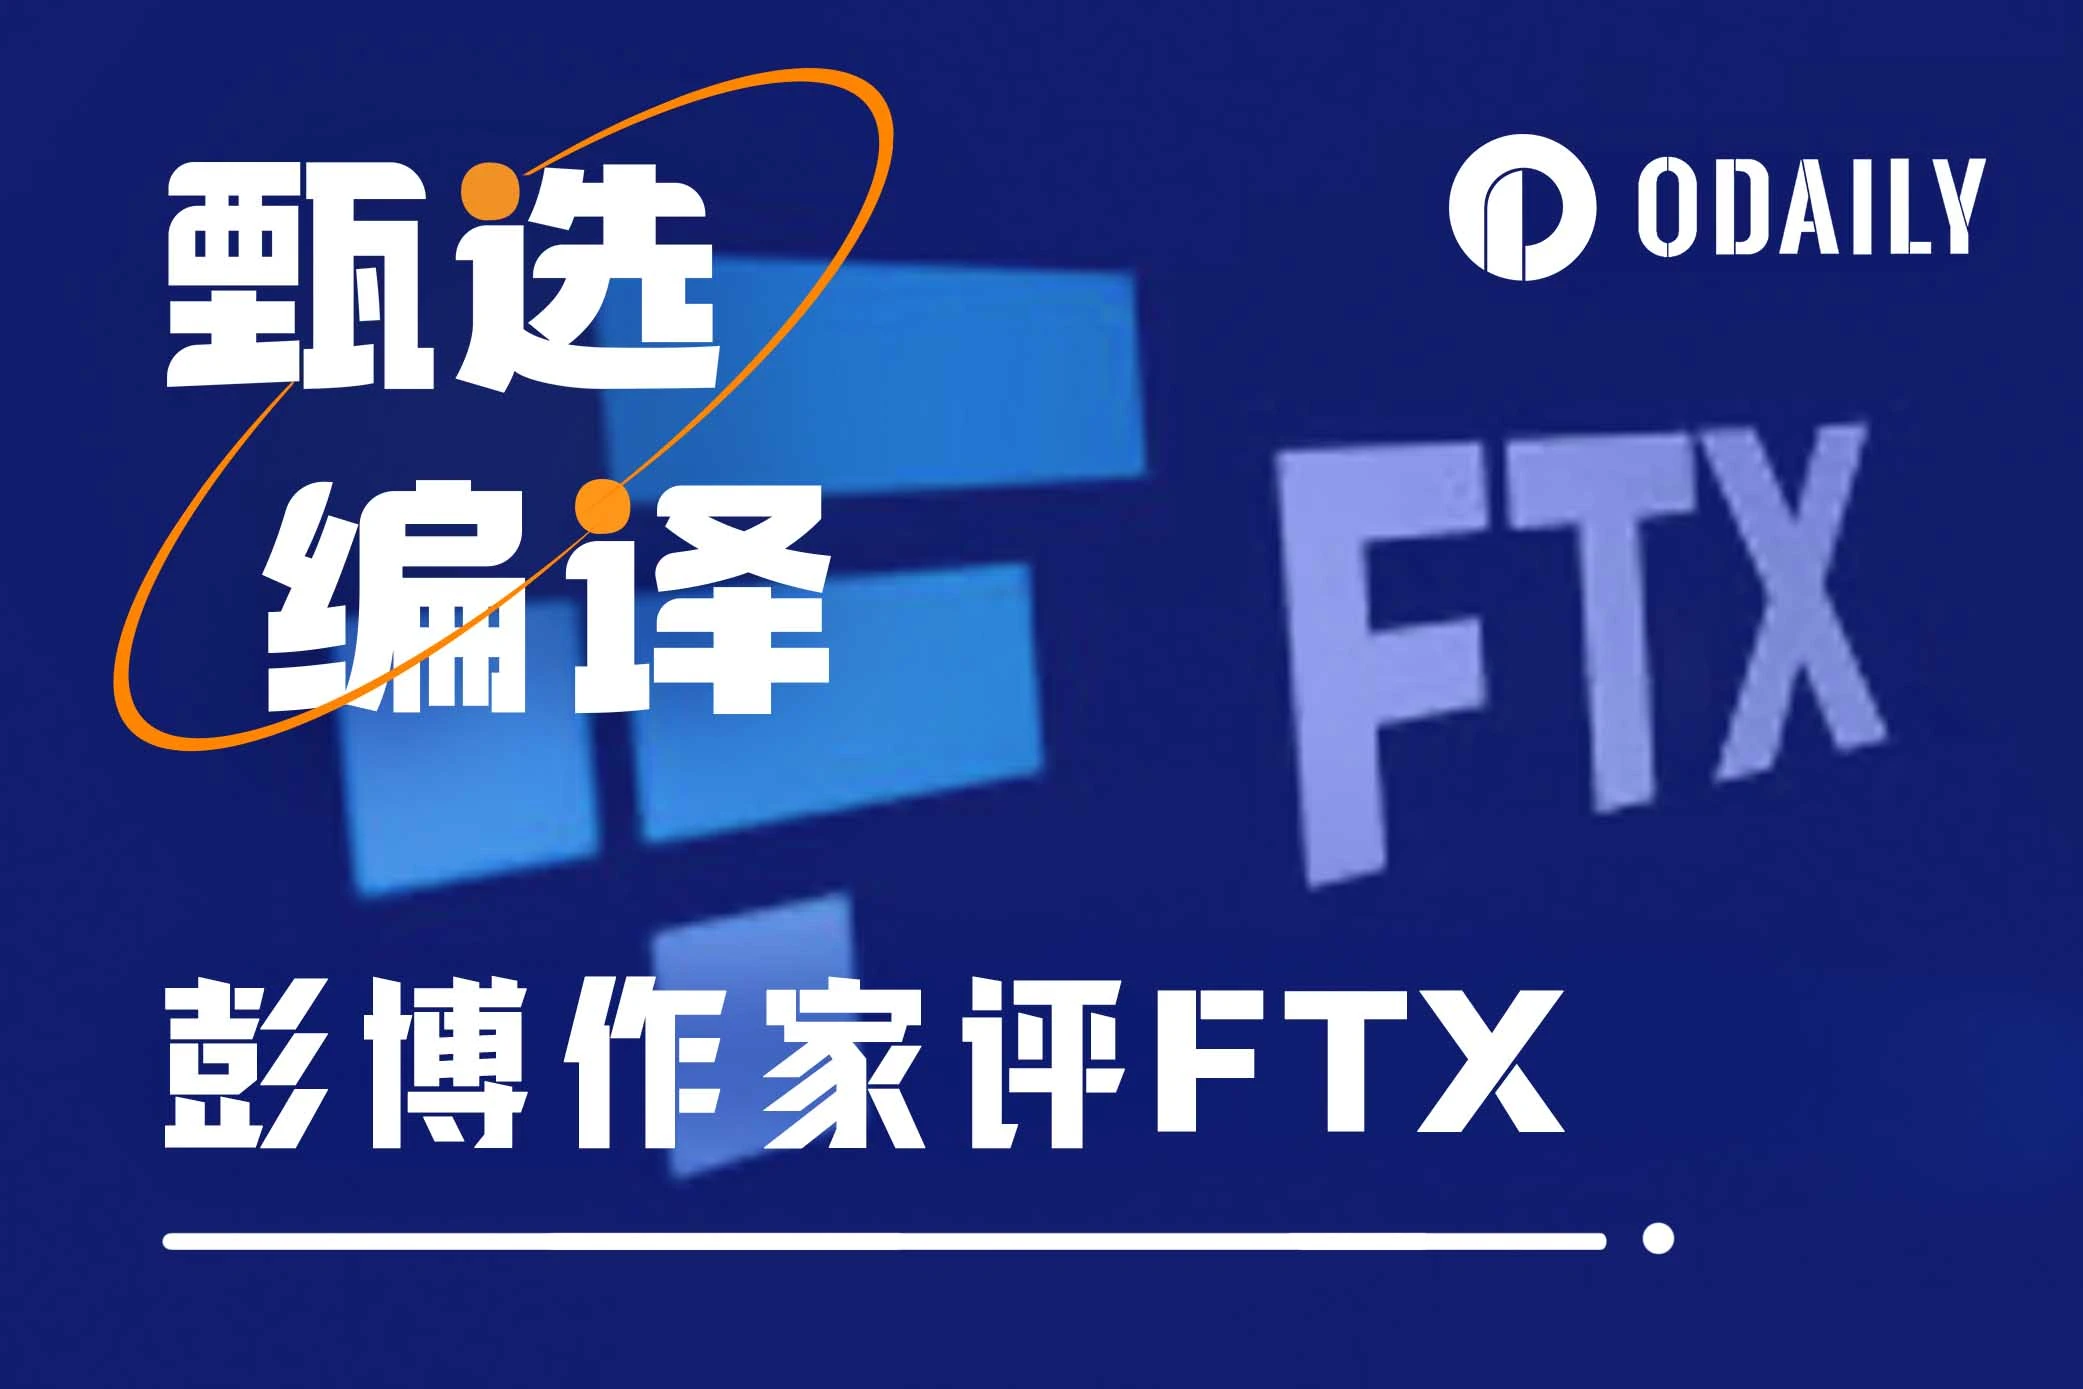 Bloomberg commented on FTX: Full compensation was achieved by taking advantage of the bull market, but its a pity that SBF didnt last until this day